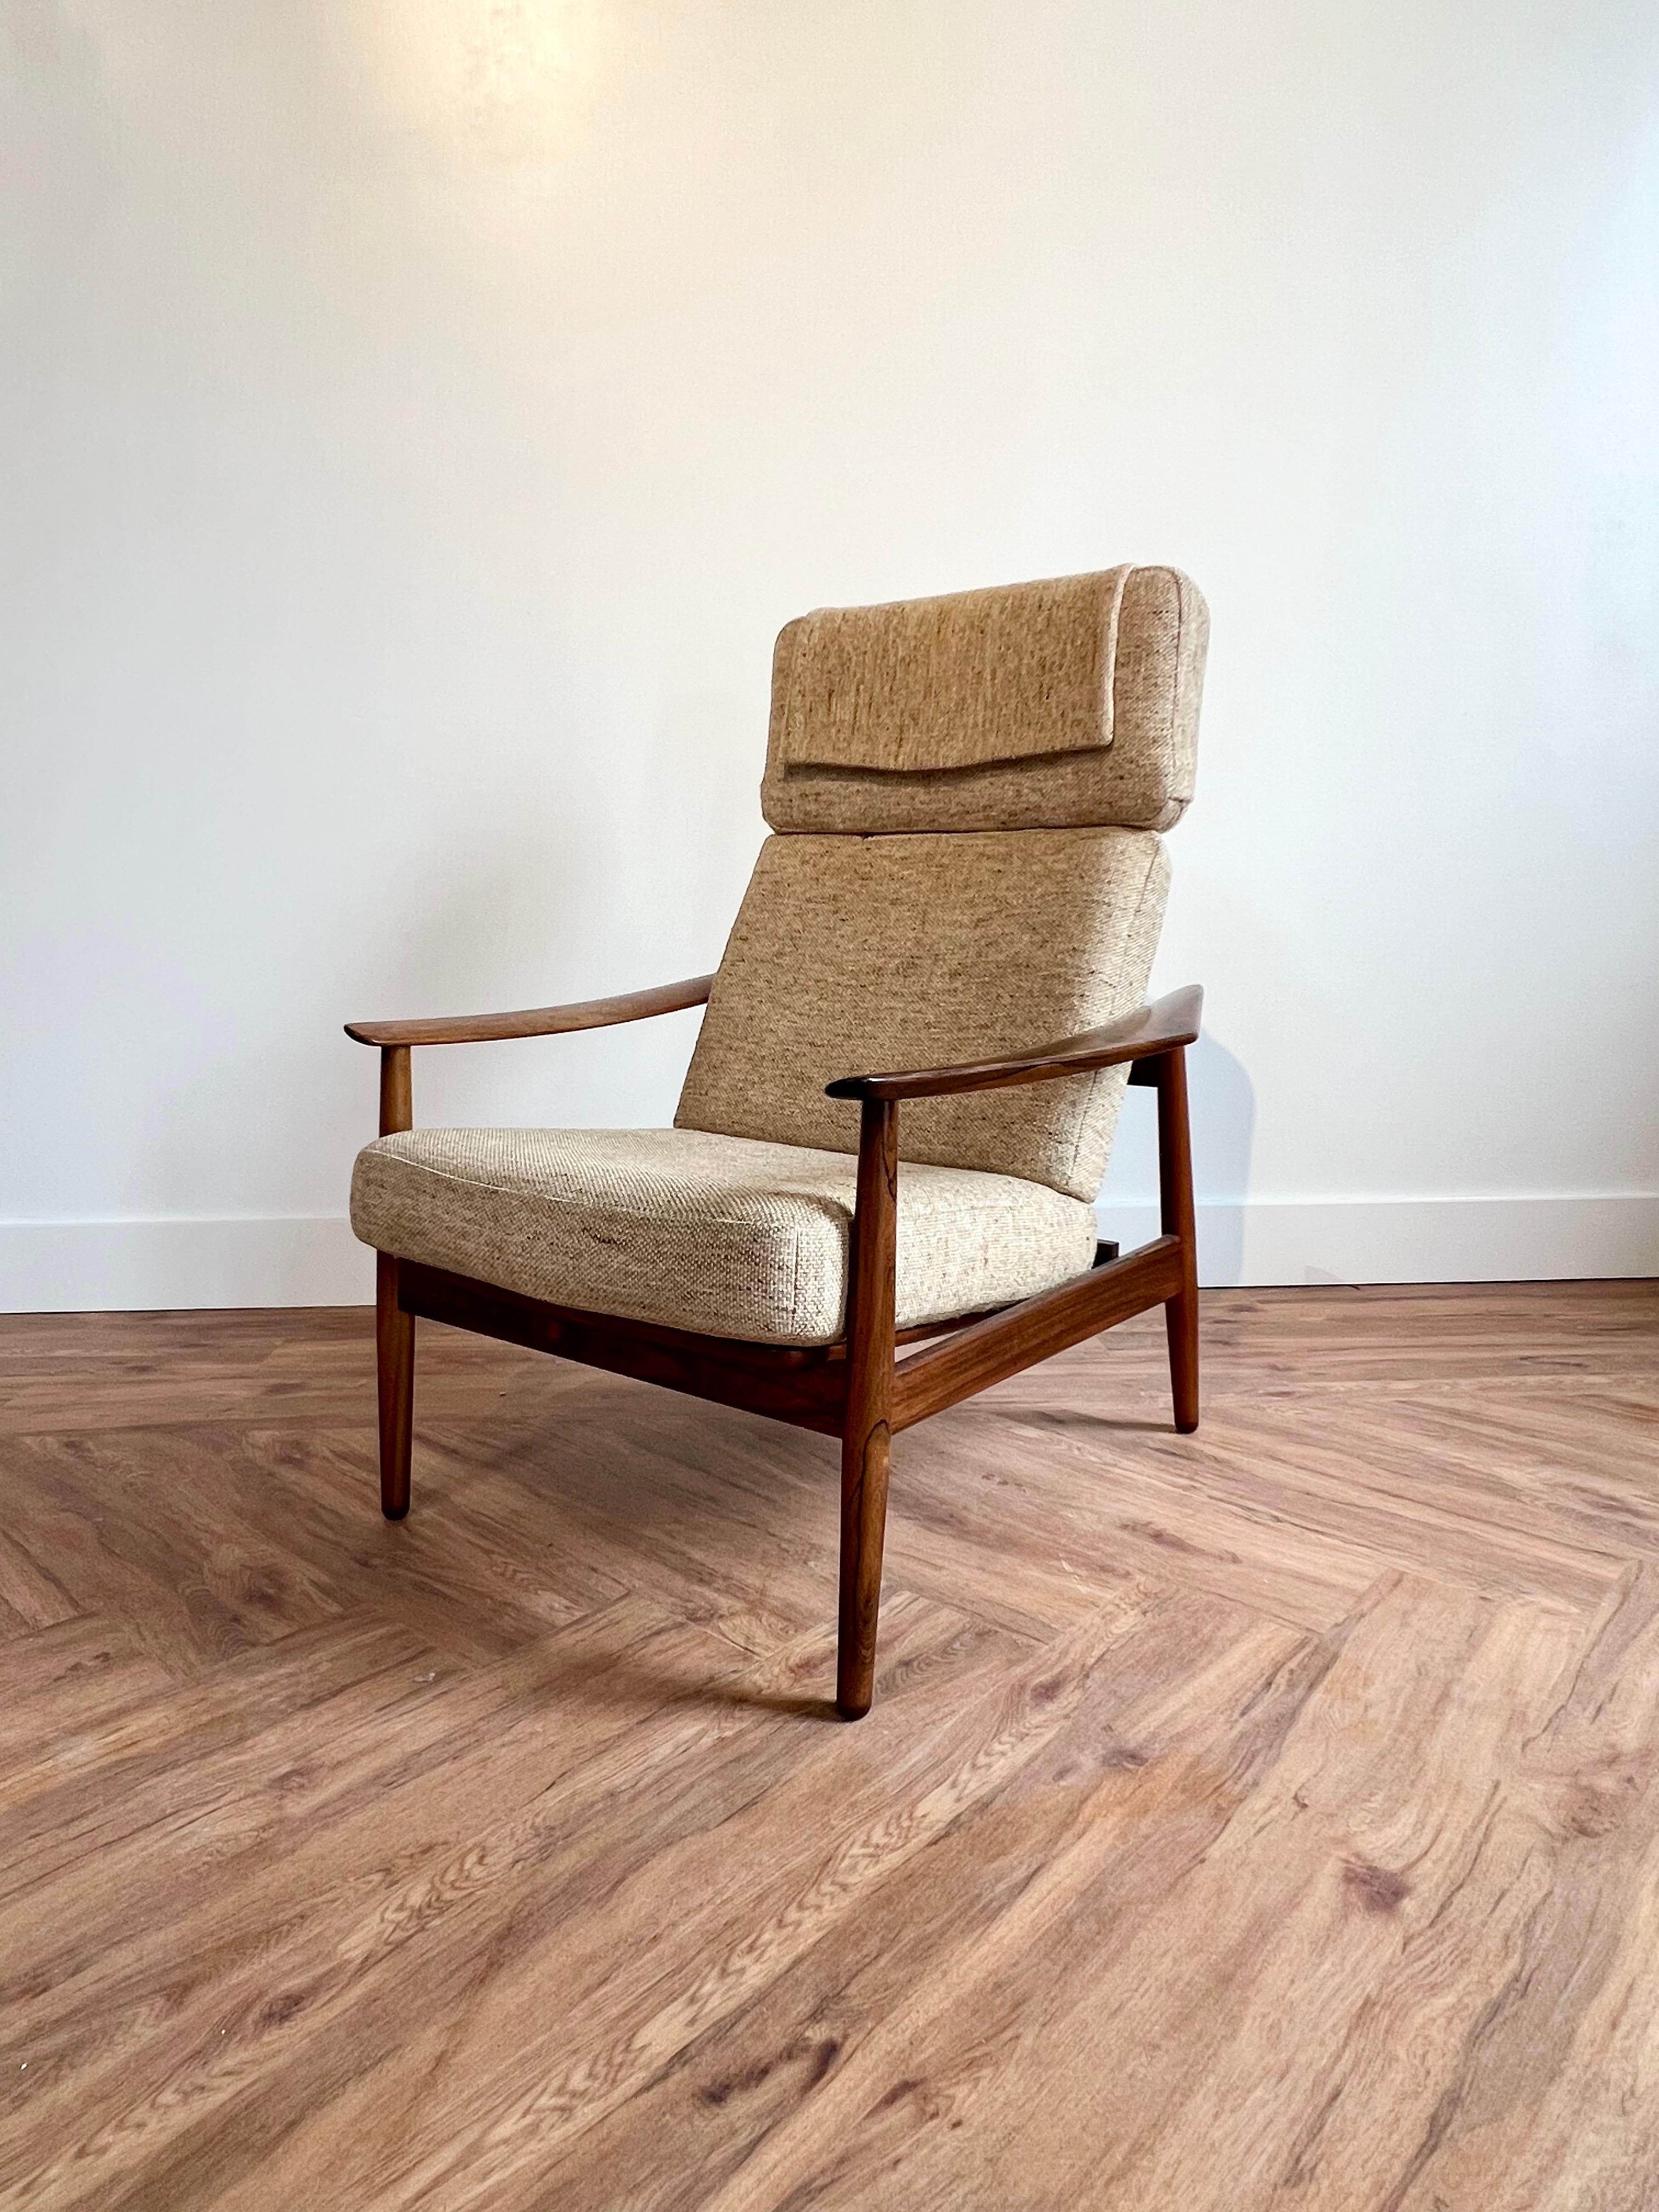 Arne Vodder's iconic FD164 Reclining Lounge Chair in rare rosewood c1960s. This is a one-person-owner who had no kids, no pets, and was a non-smoker. This is a wonderful example with all original patina and the incredibly built original soft wool